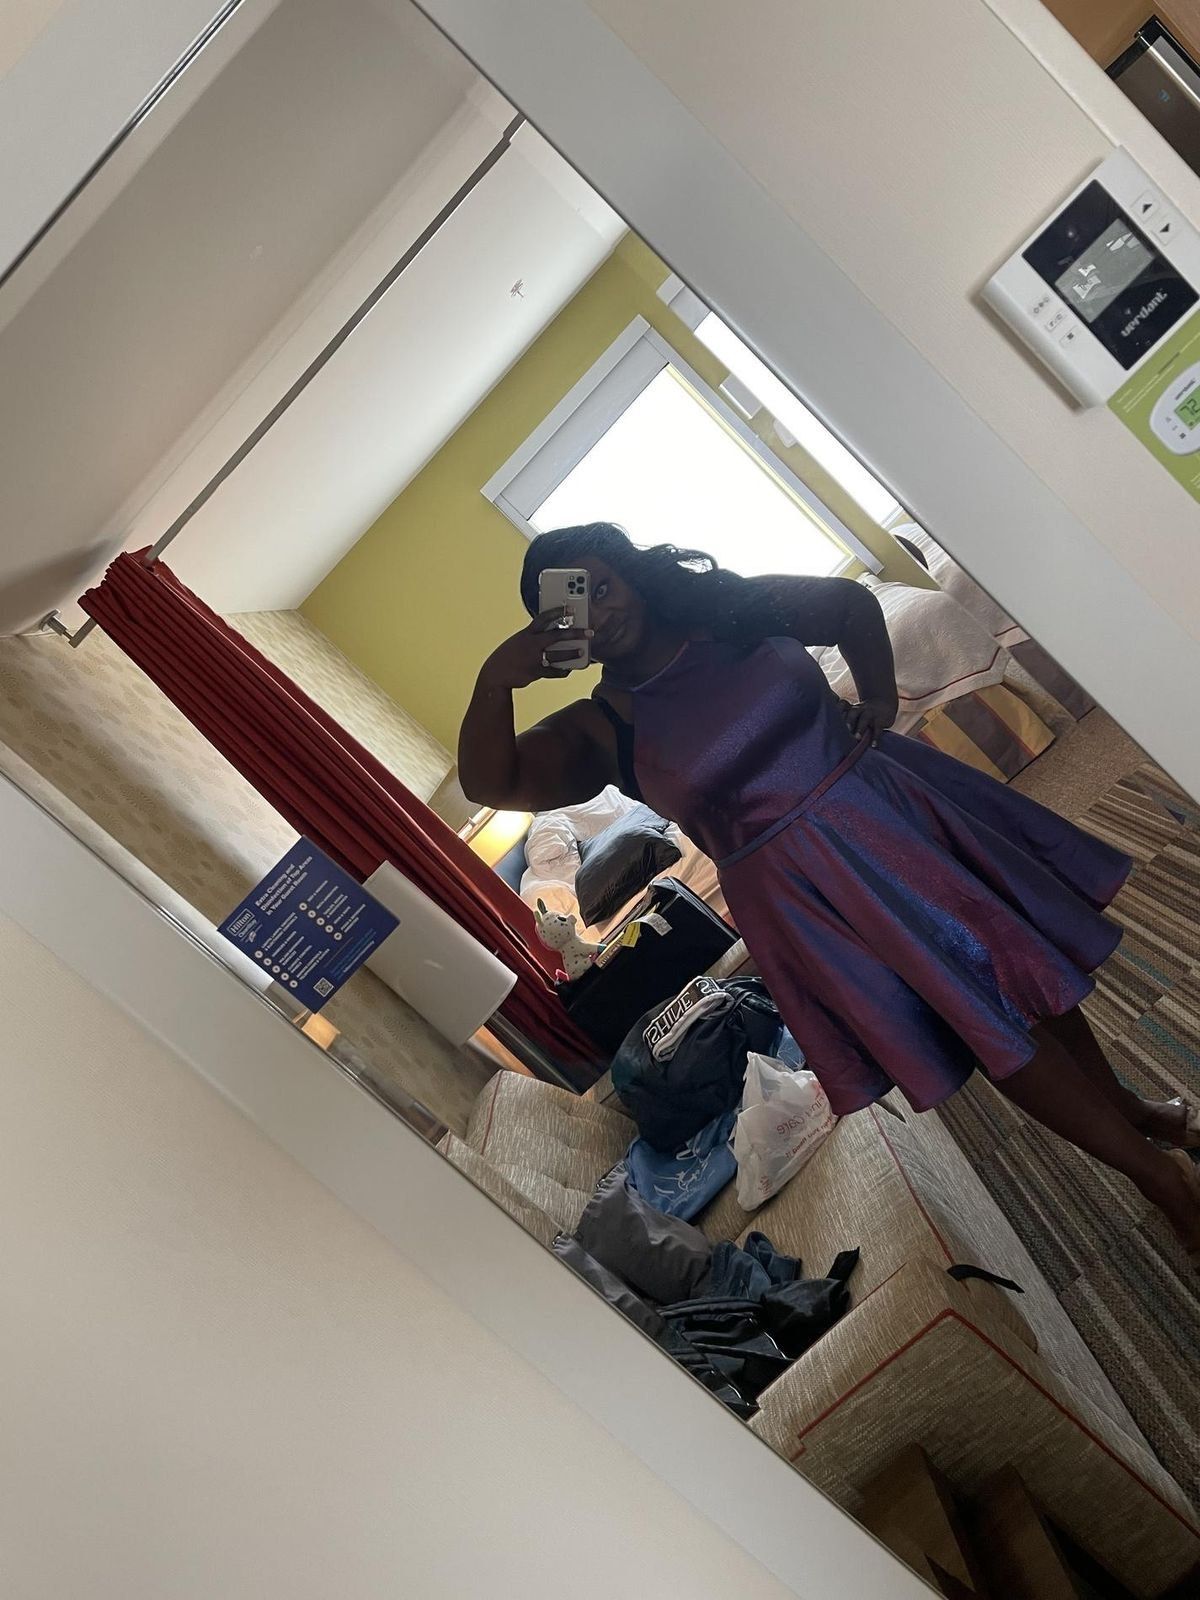 Sydney’s Closet Plus Size 20 Homecoming Purple Cocktail Dress on Queenly